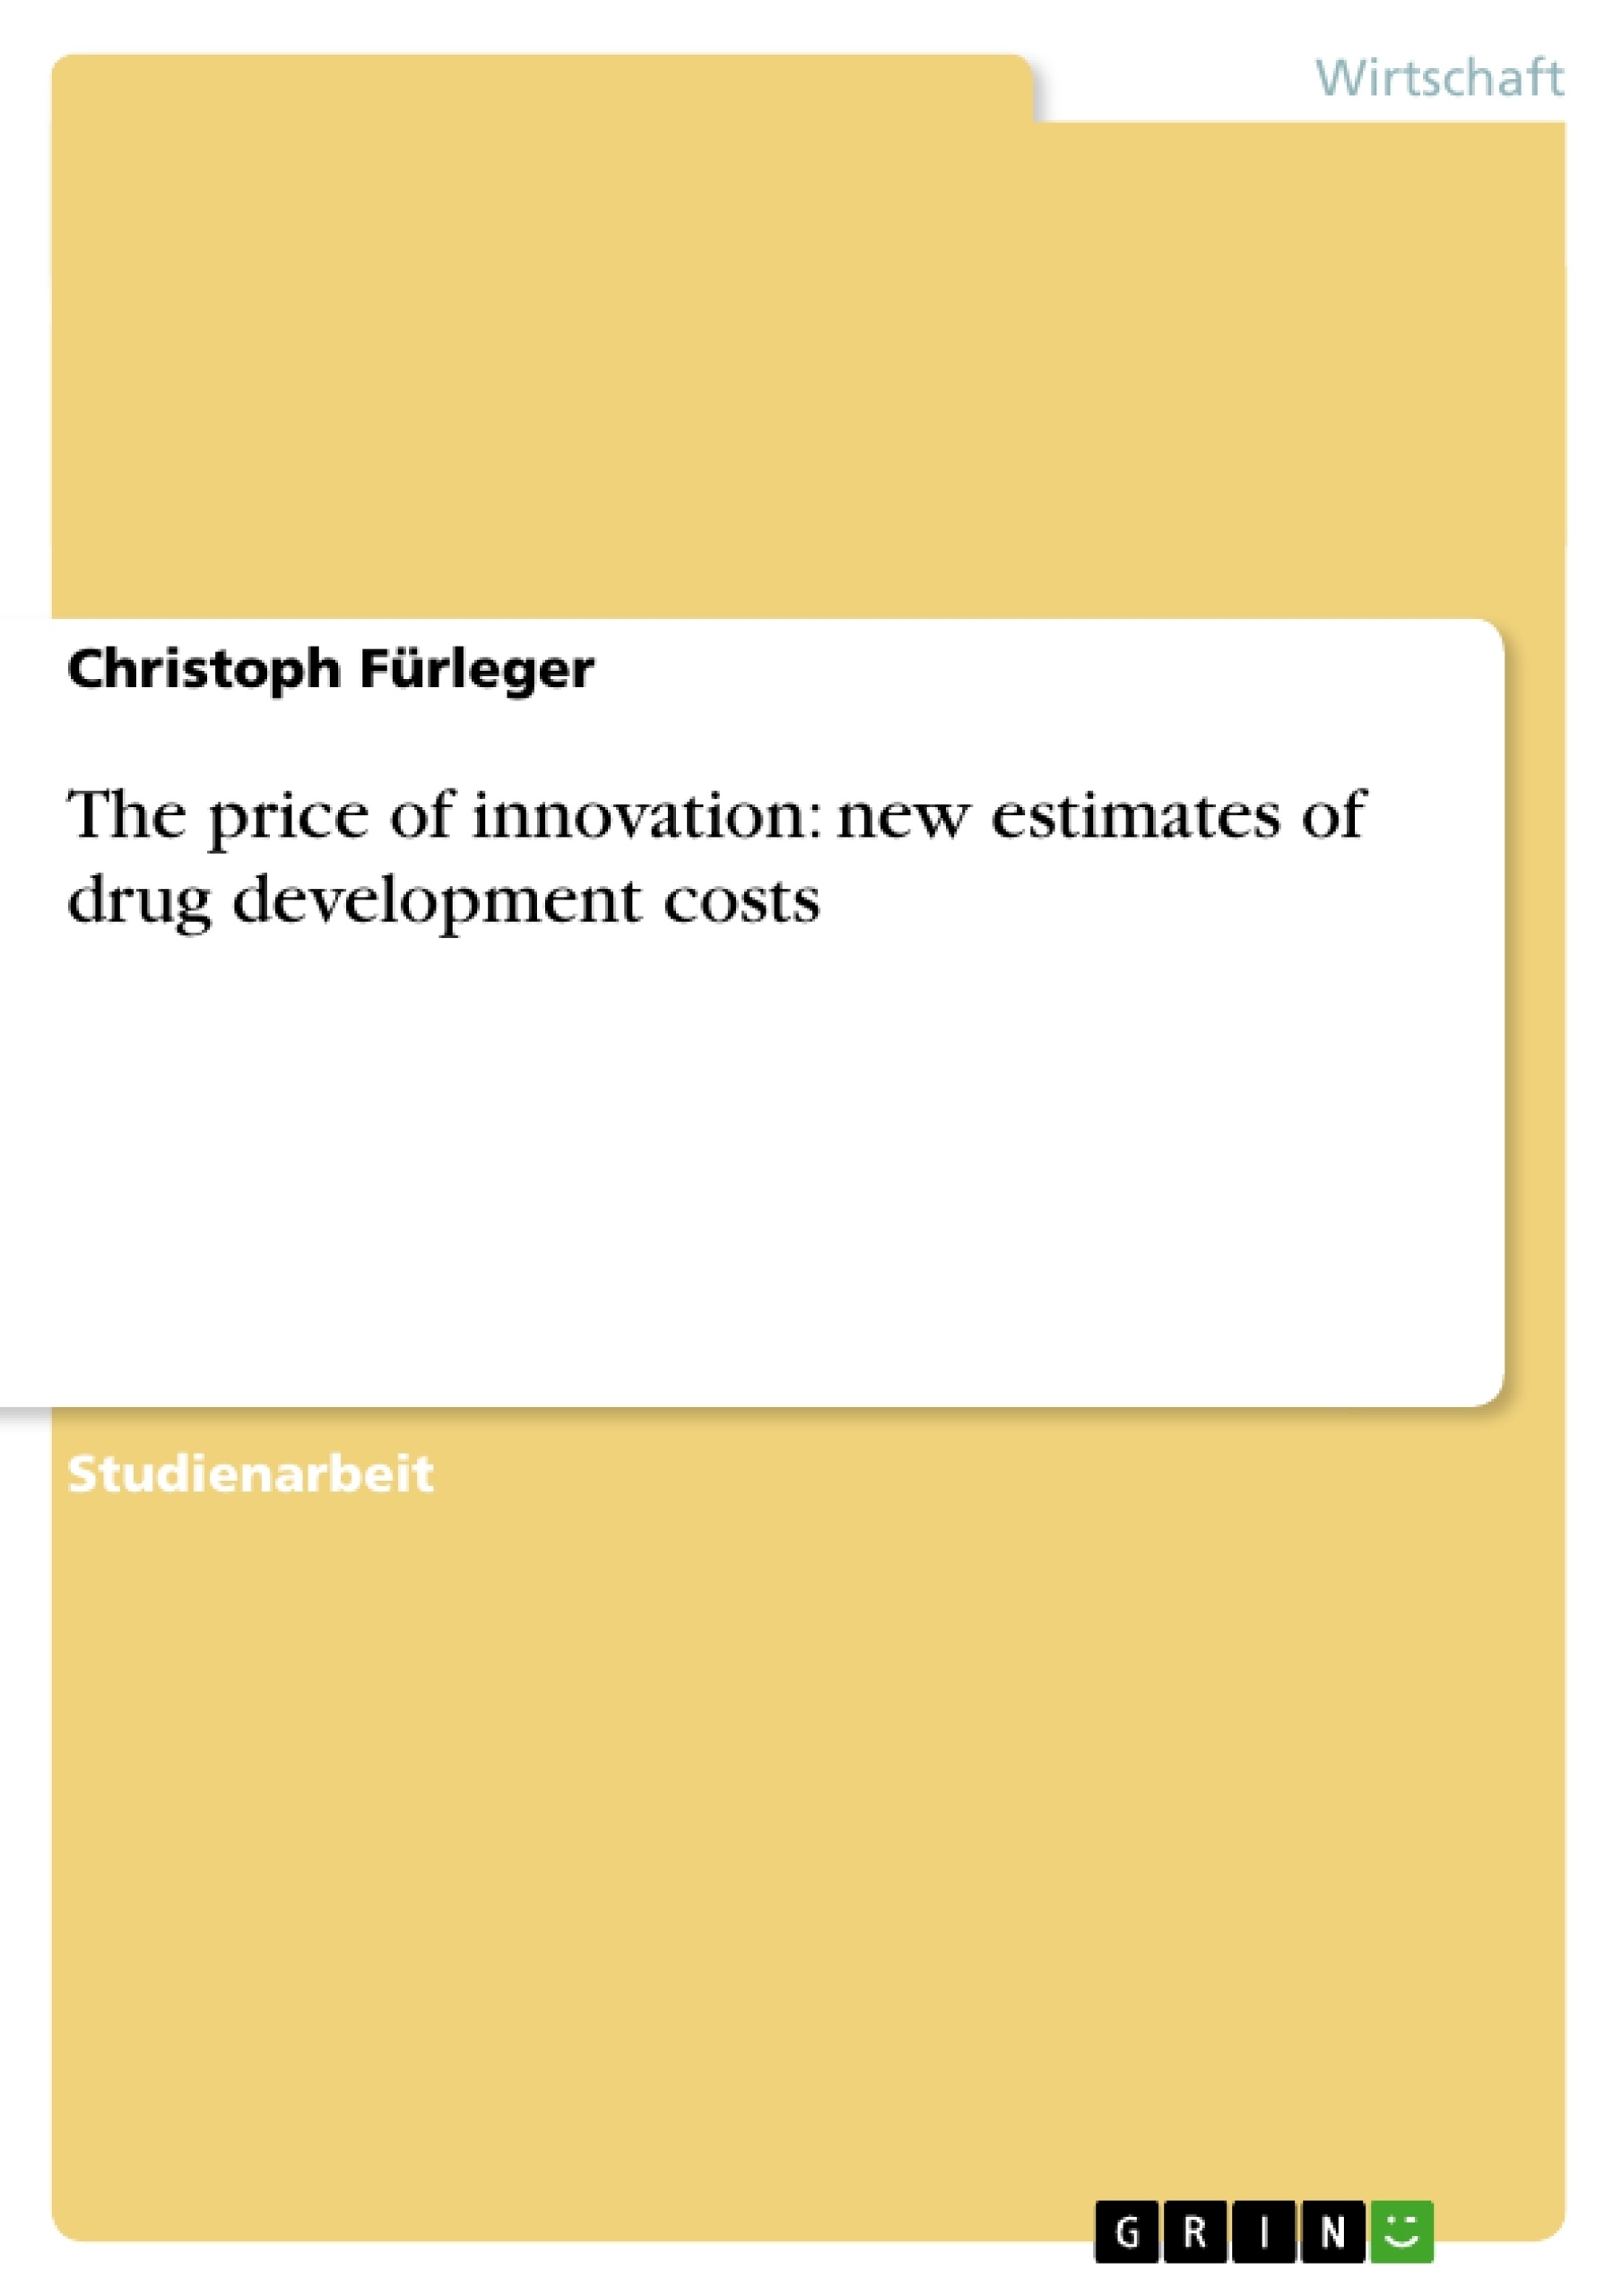 Titre: The price of innovation: new estimates of drug development costs